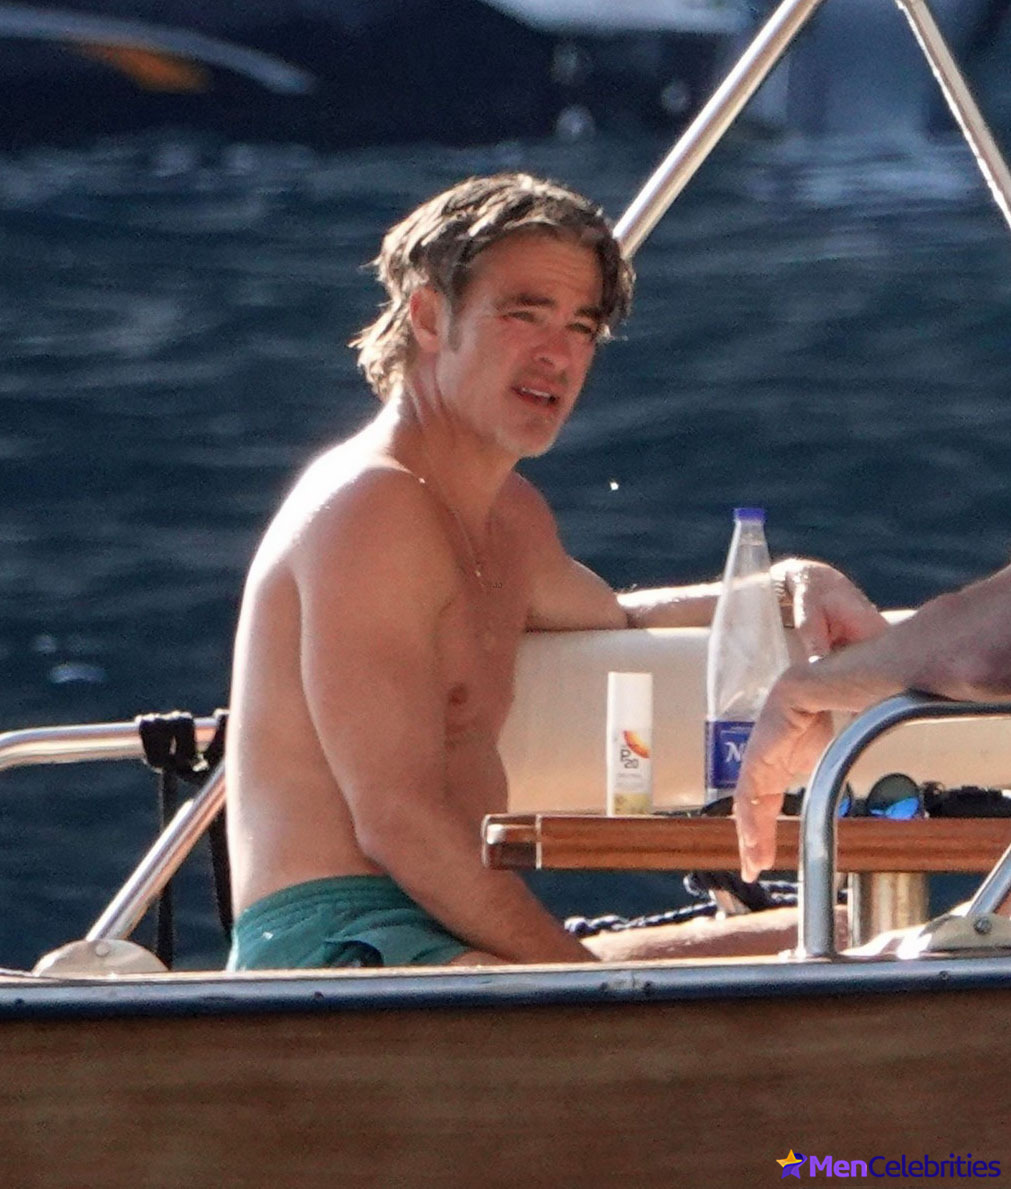 Chris Pine took off his shirt and enjoyed his time on the boat